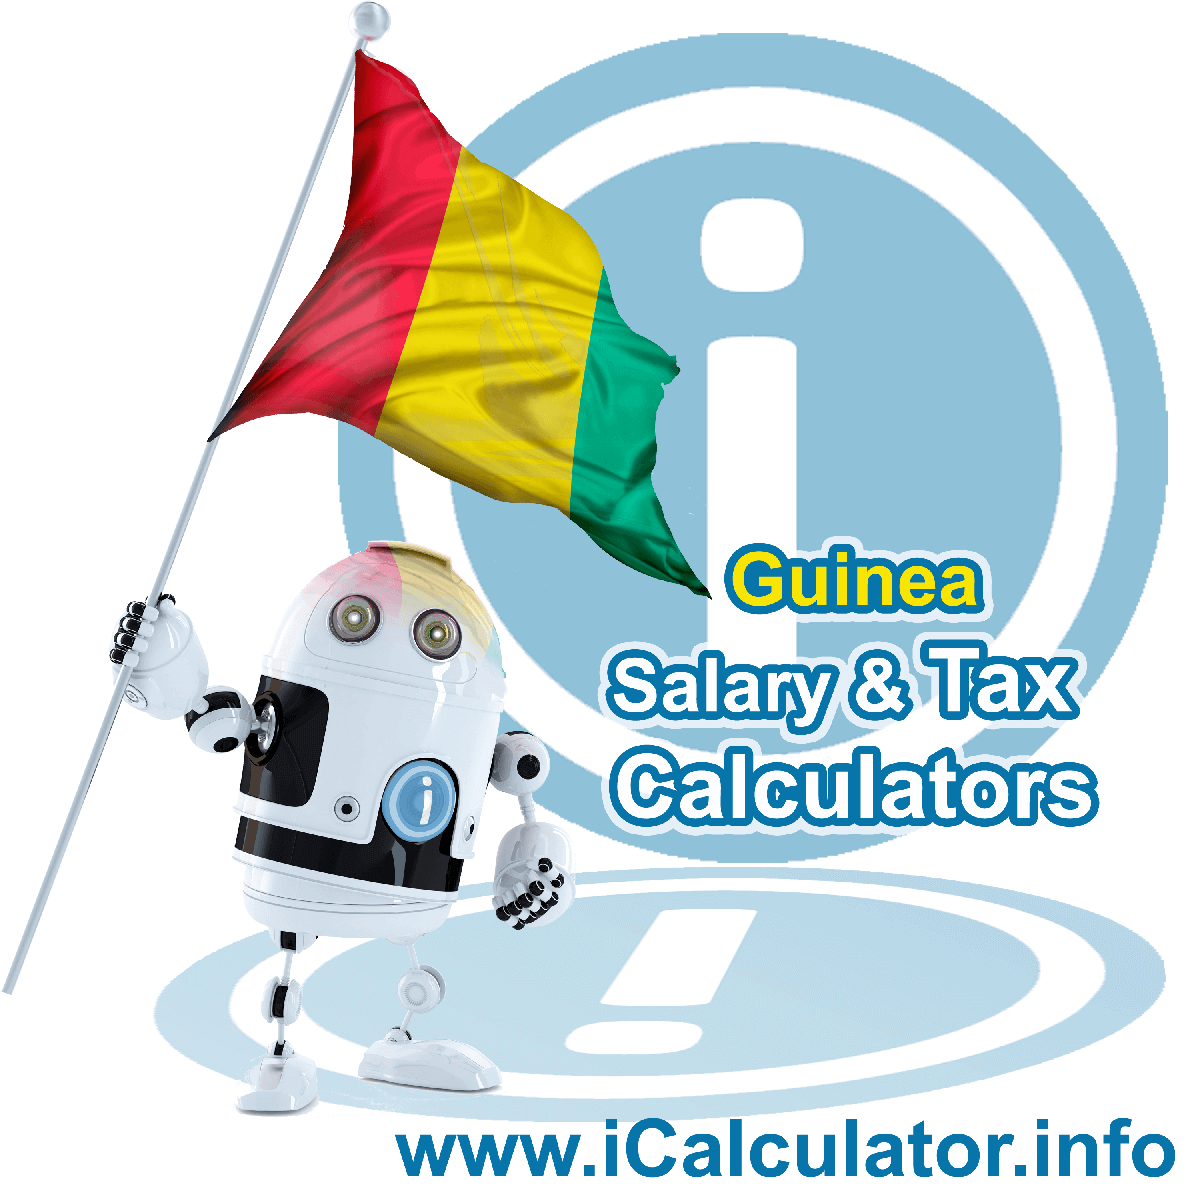 Guinea Salary Calculator. This image shows the Guineaese flag and information relating to the tax formula for the Guinea Tax Calculator